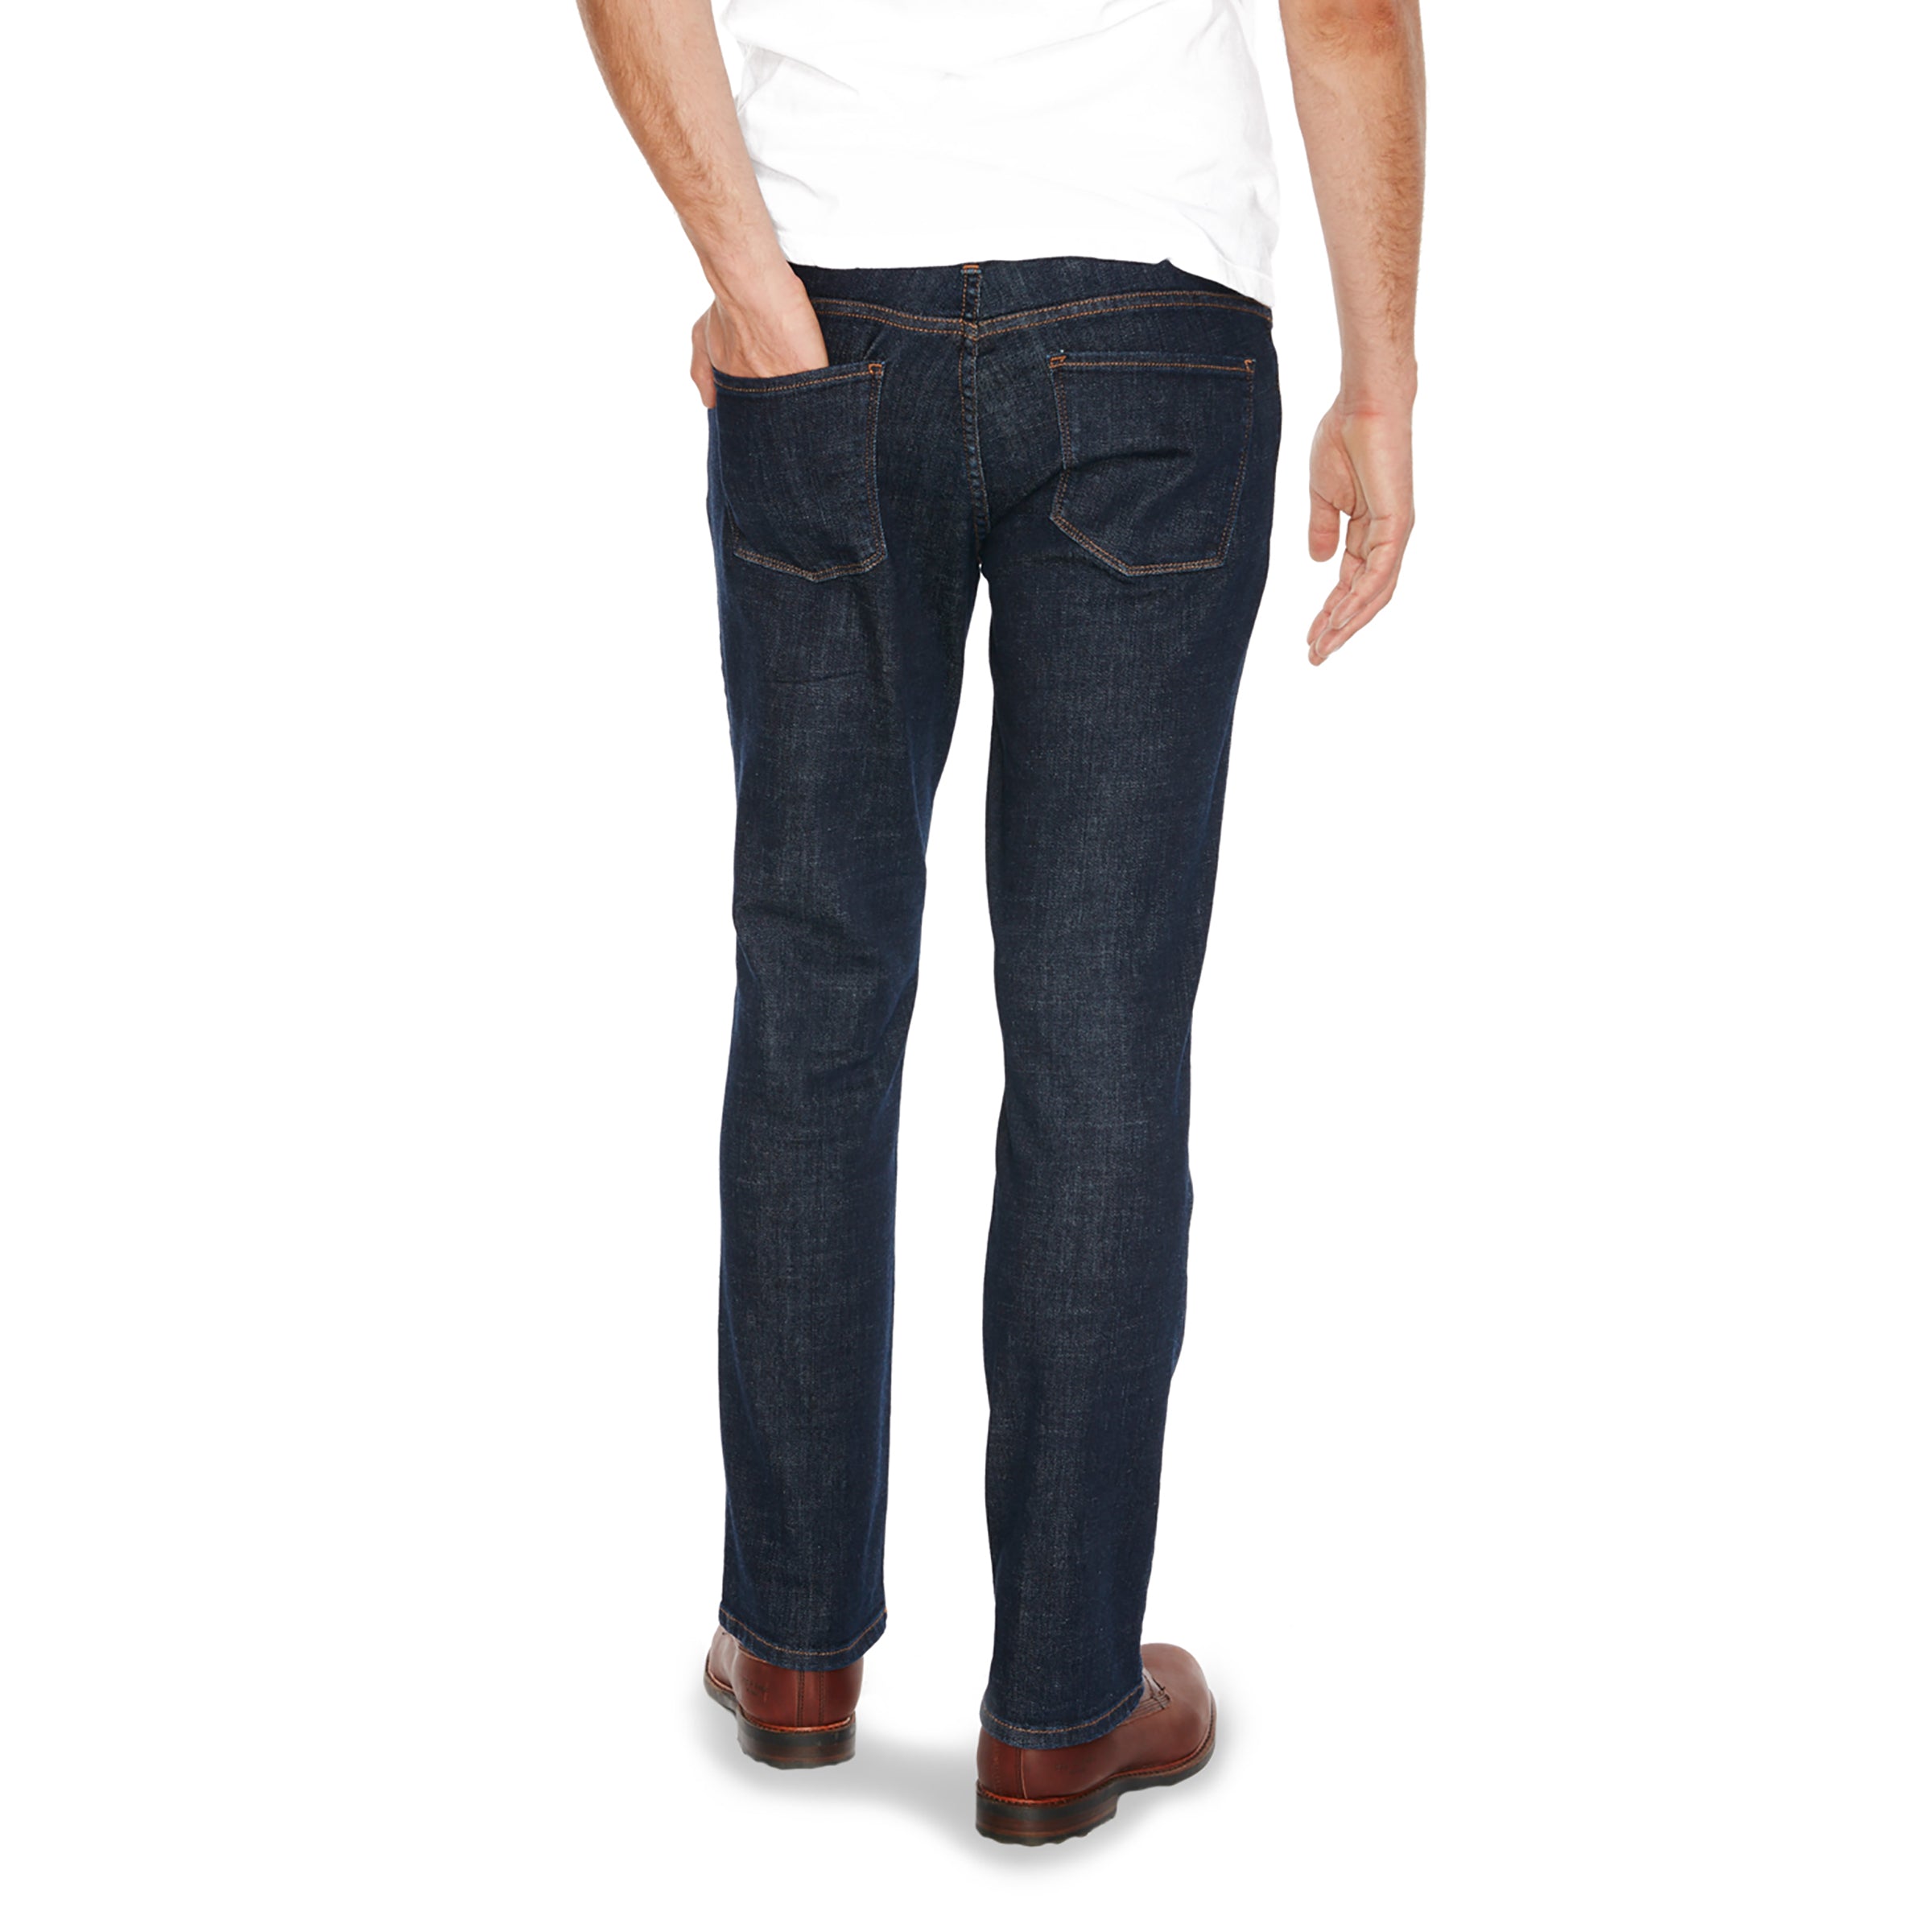 Men wearing Azul oscuro Straight Wooster Jeans